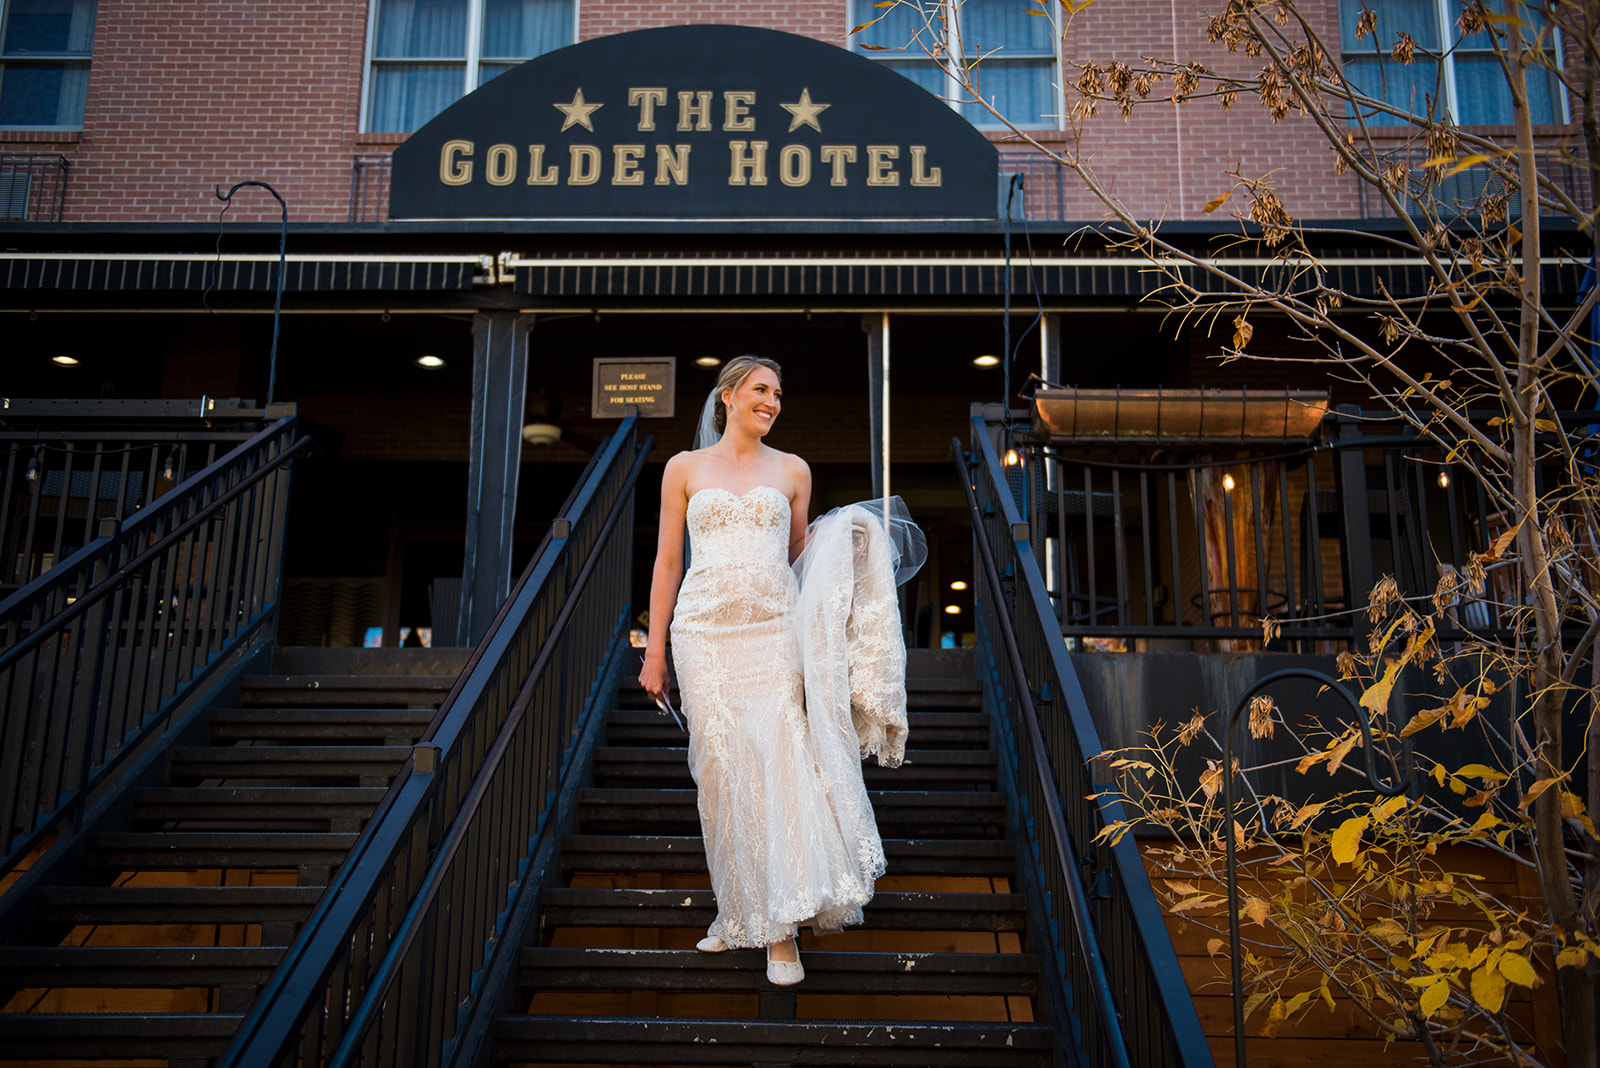 The bride walks down the front steps of The Golden Hotel in Colorado, holding the train of her dress in one hand.